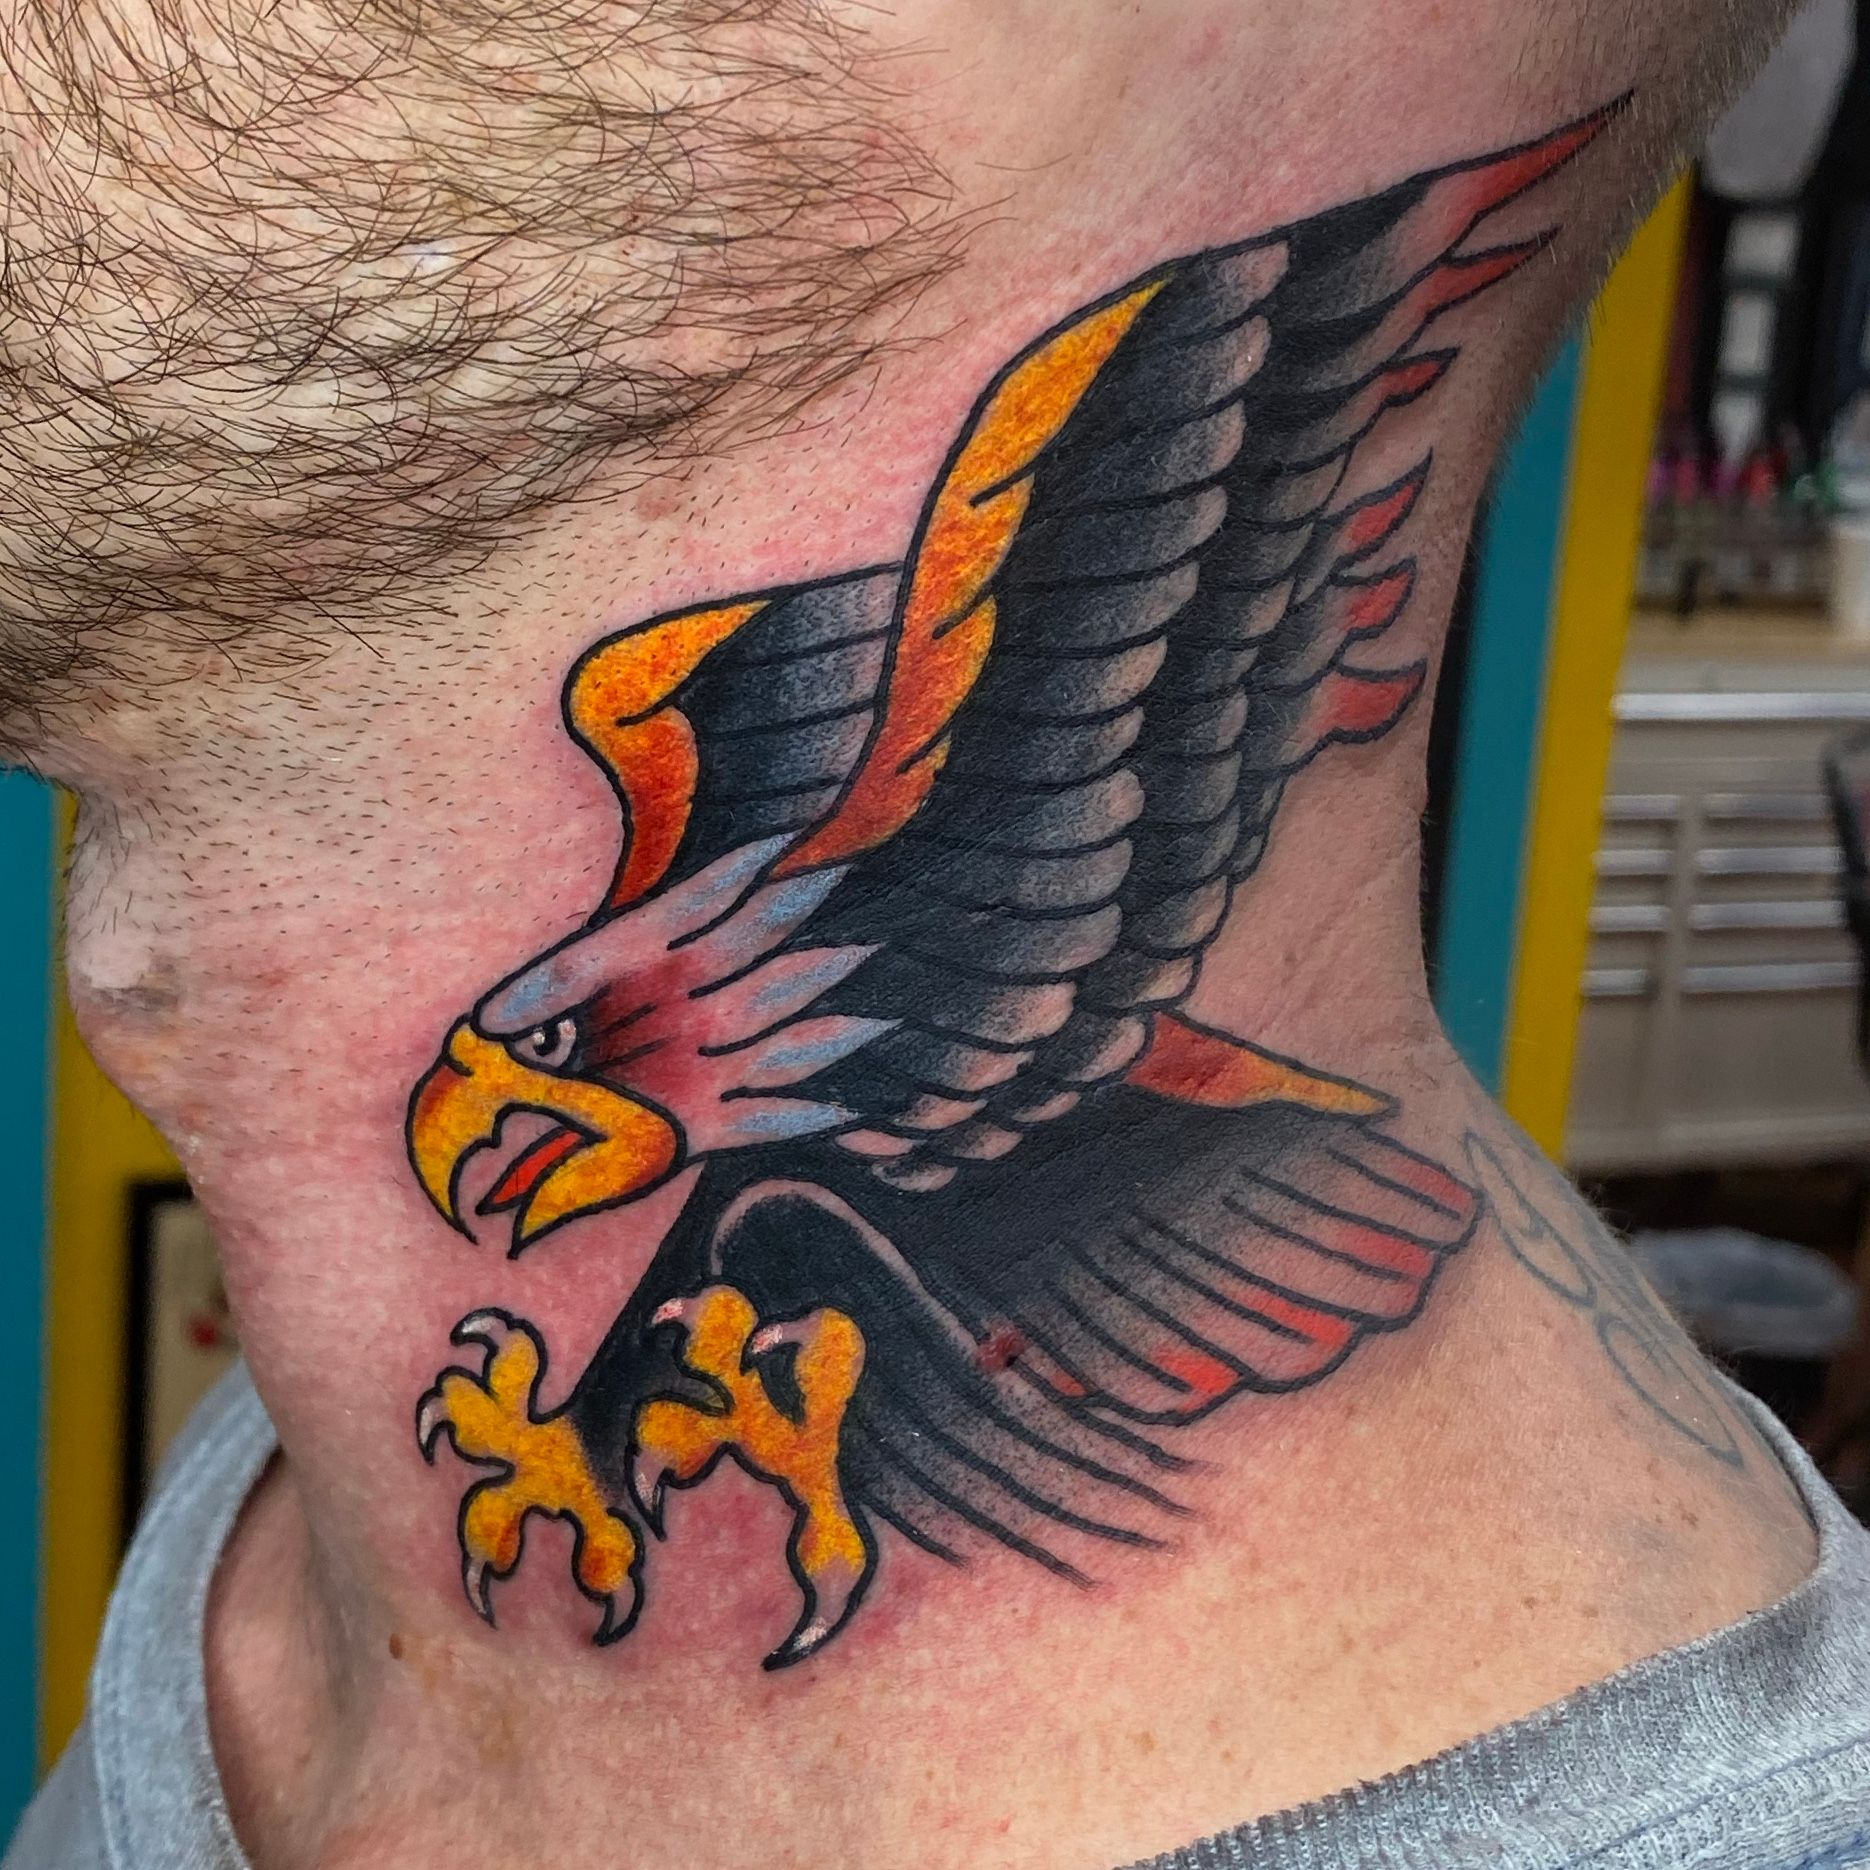 The end complete #art #tattoo #eagle #gym #oldschool #mila… | Flickr